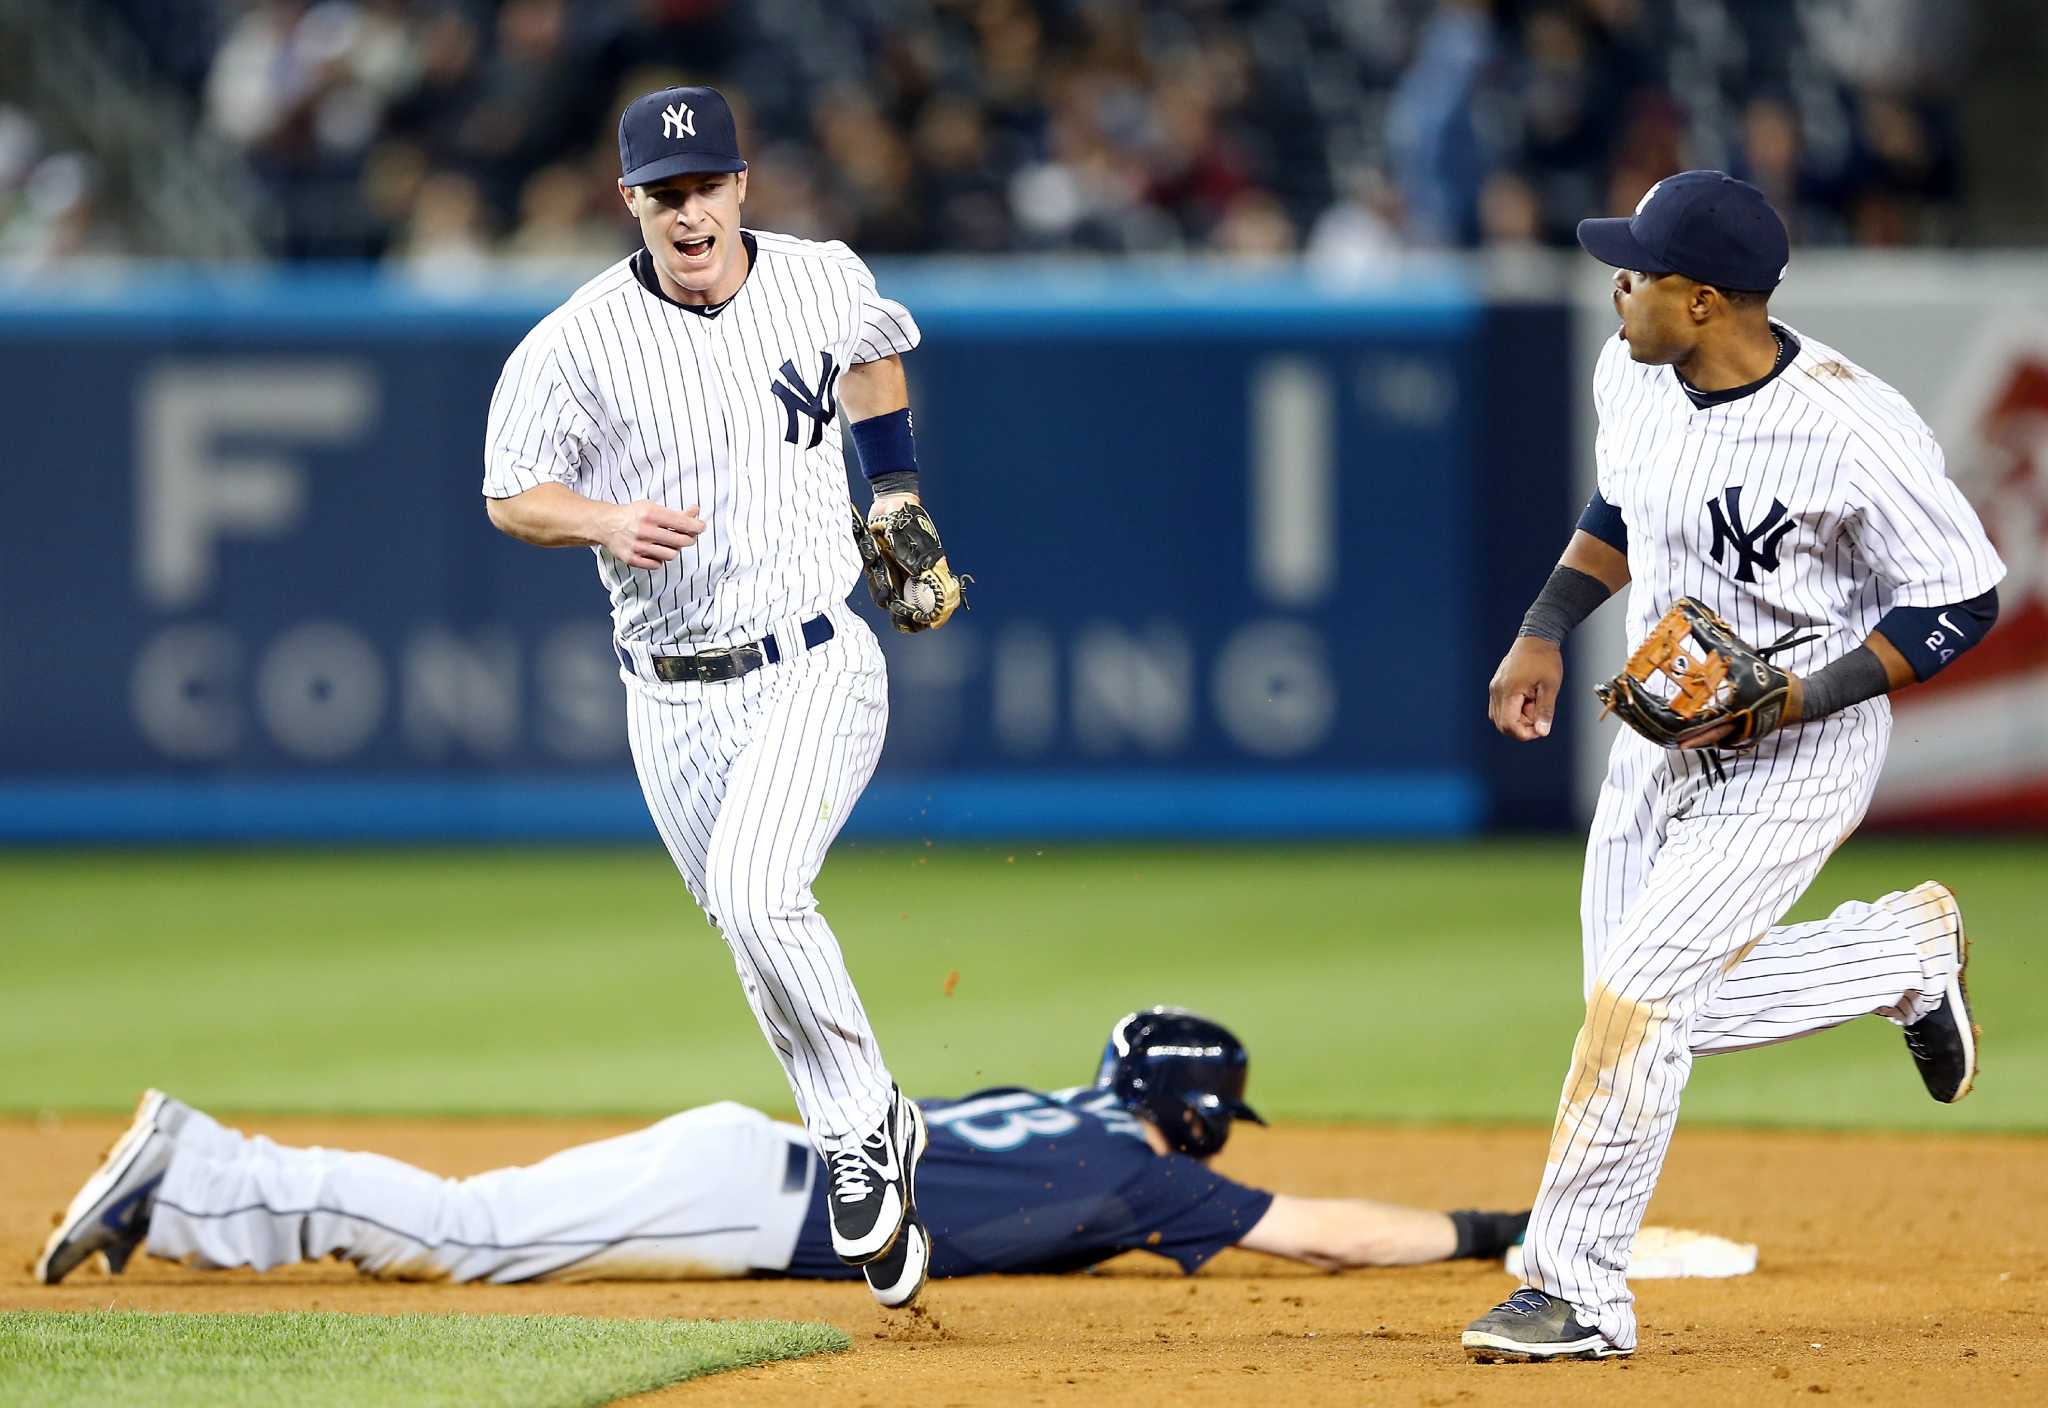 Robinson Cano homers twice in Yankees' win over Blue Jays